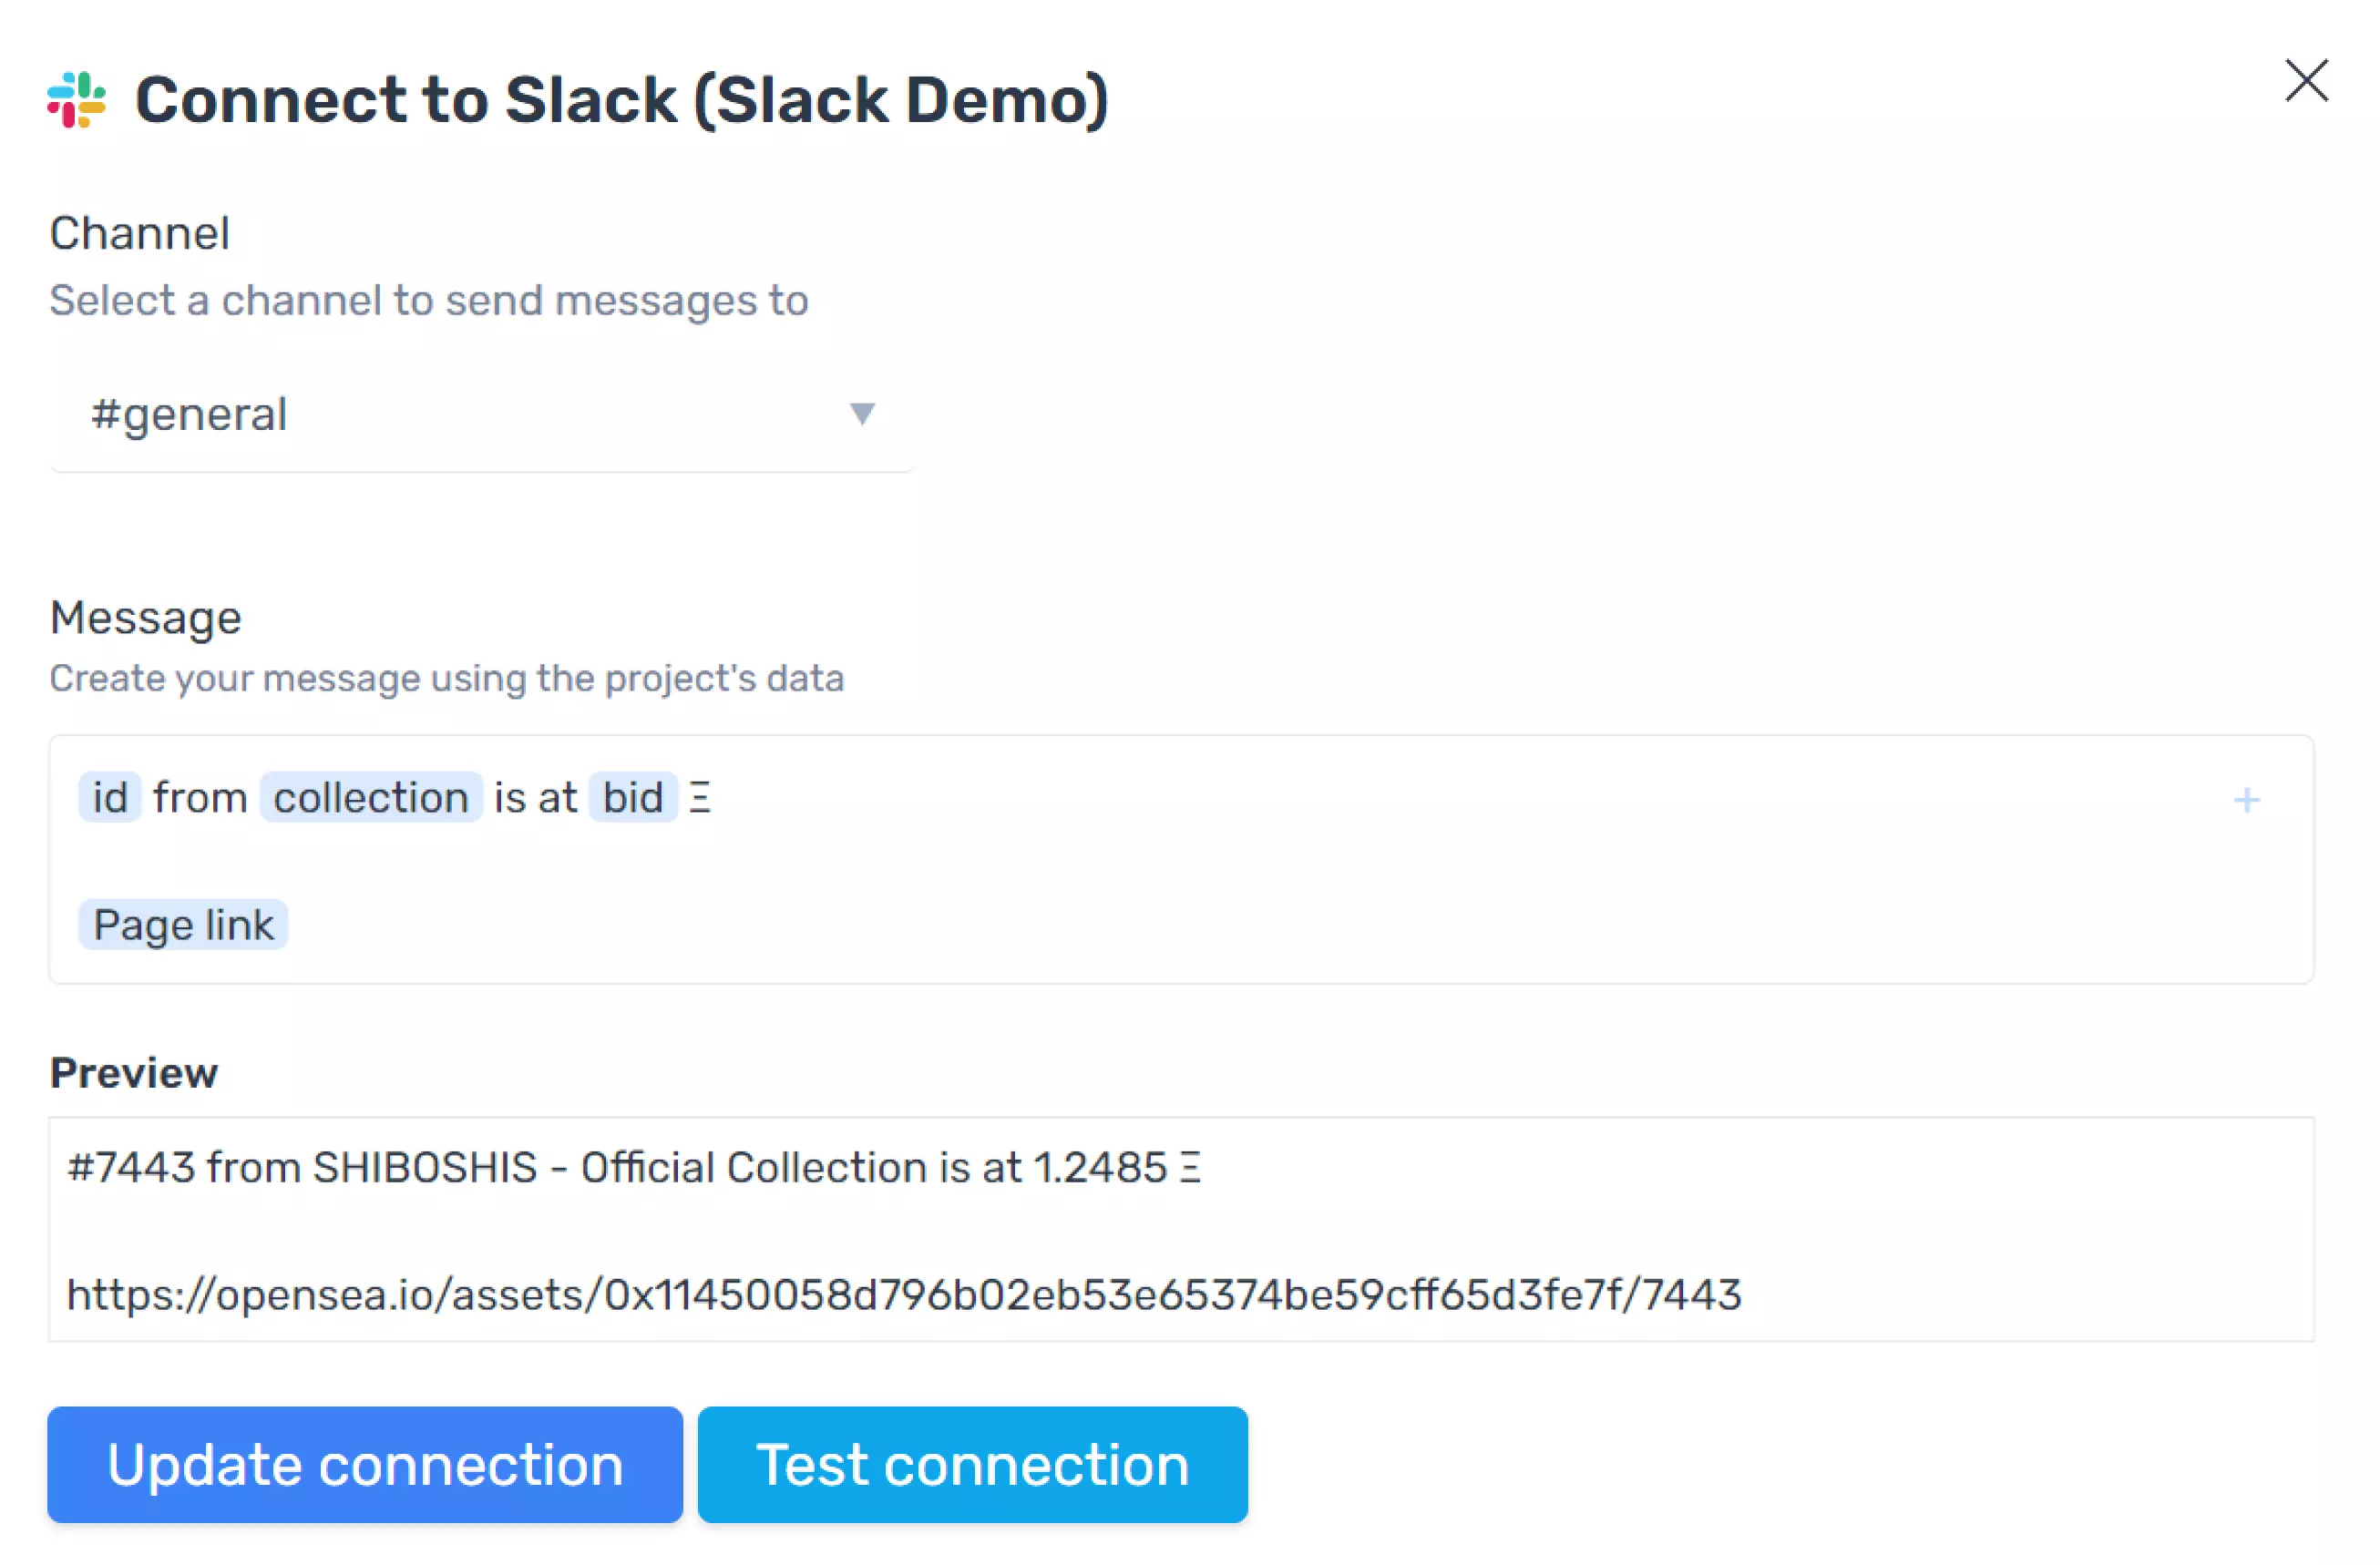 Compose a Slack message using the monitored data